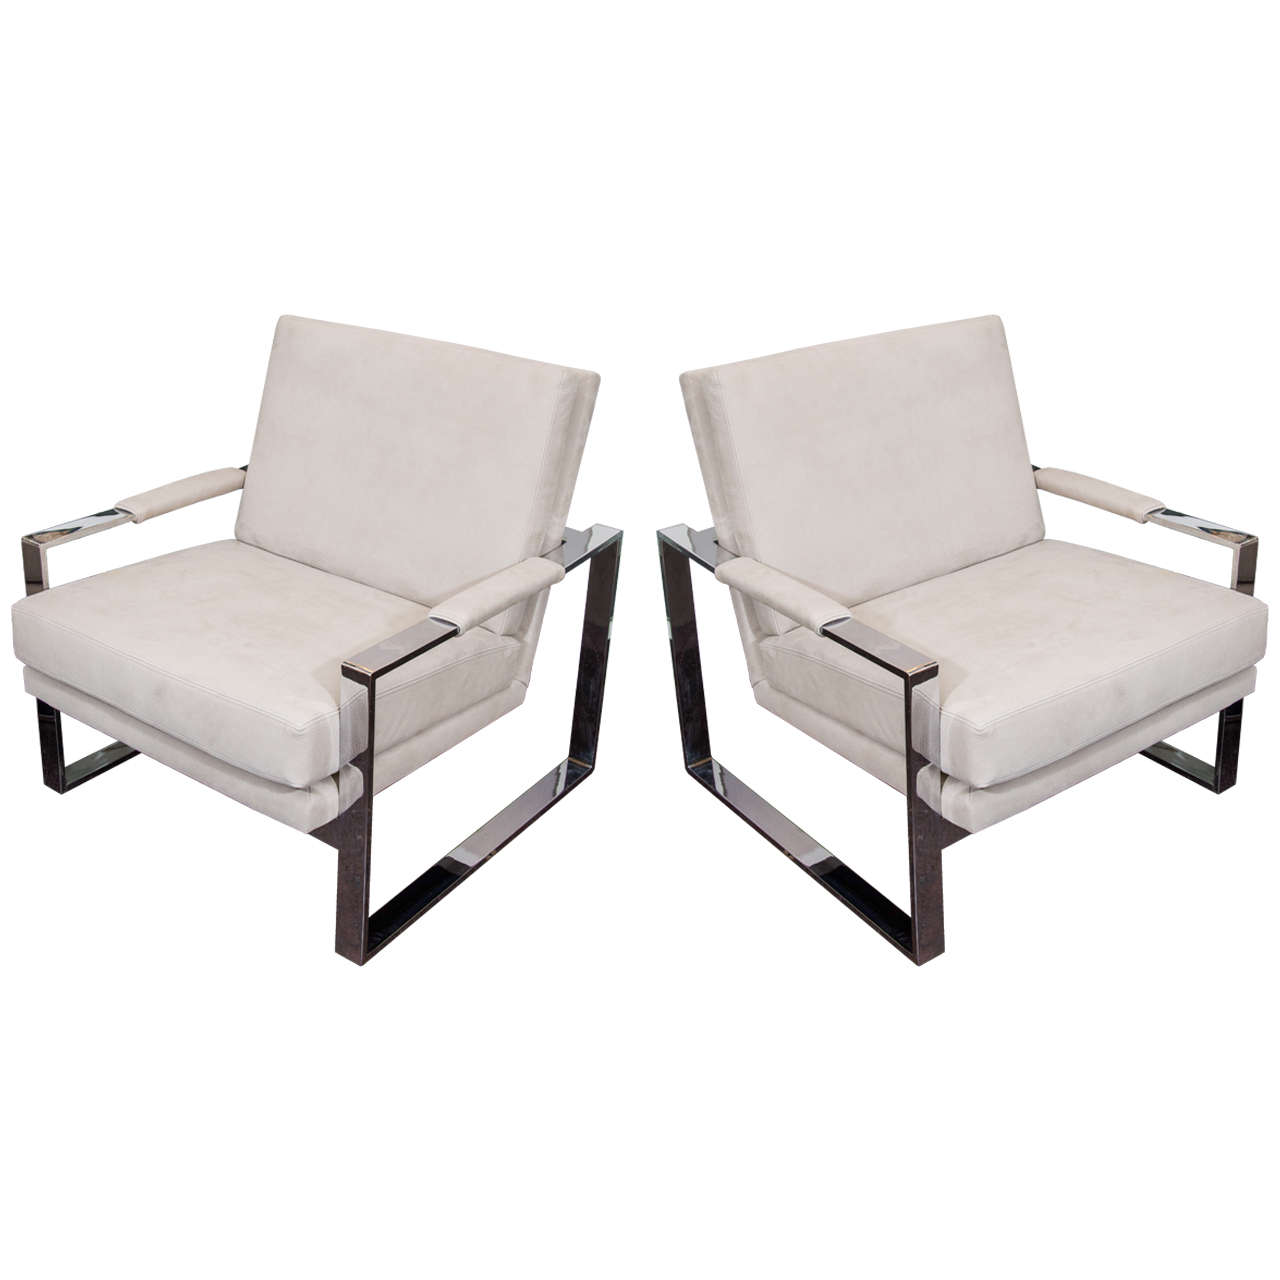 Pair of 1960s Milo Baughman Chairs with Chrome Frames